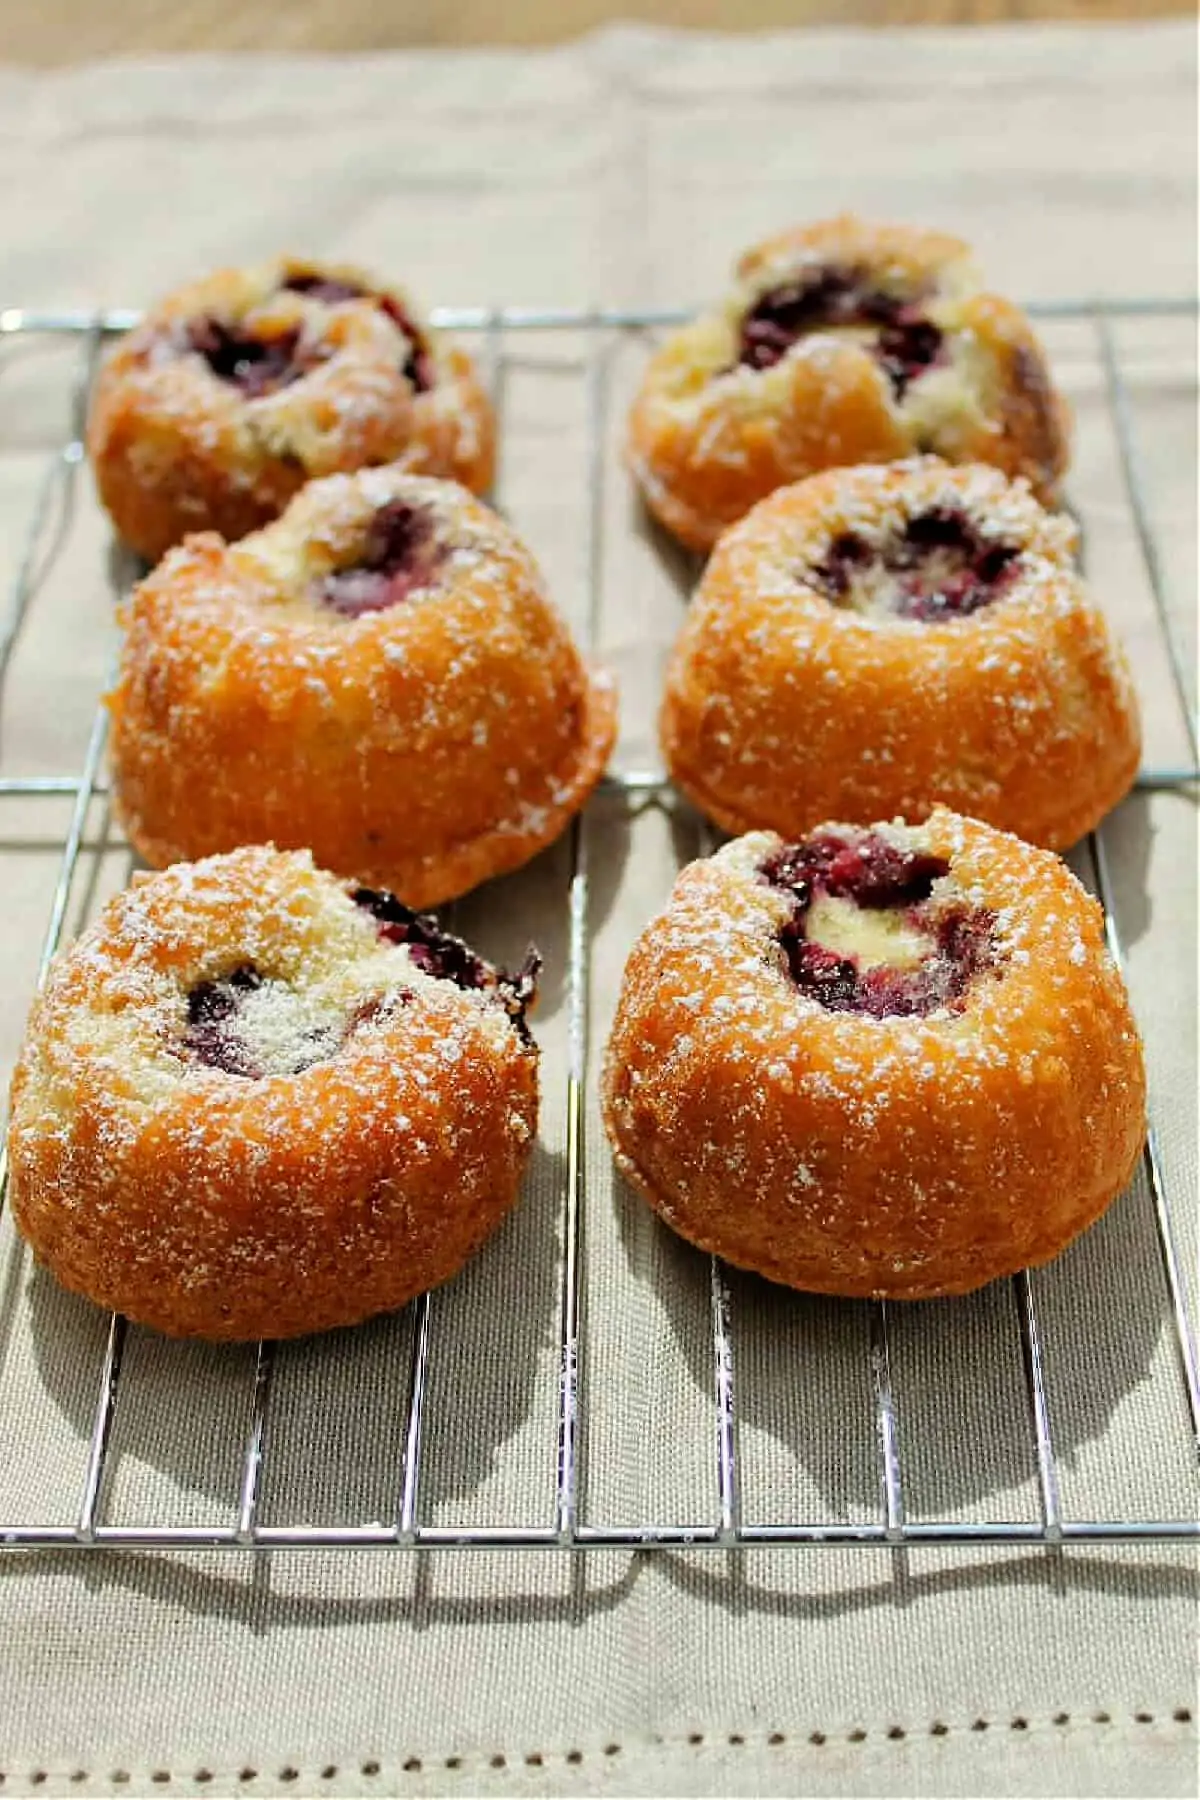 Six small cakes with blackberry filling on a metal cooling rack.